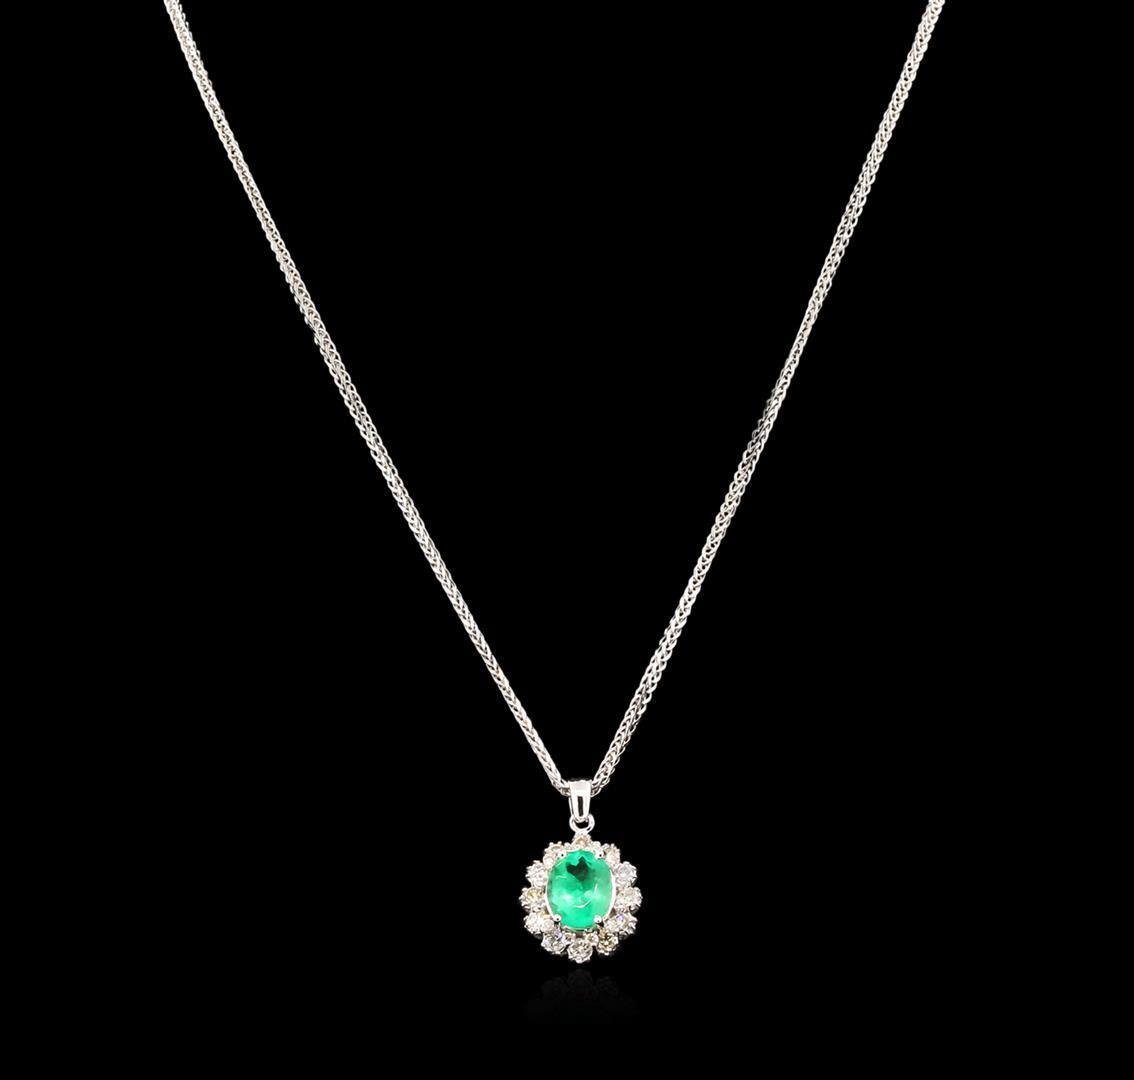 2.52 ctw Emerald and Diamond Pendant With Chain - 14KT White Gold